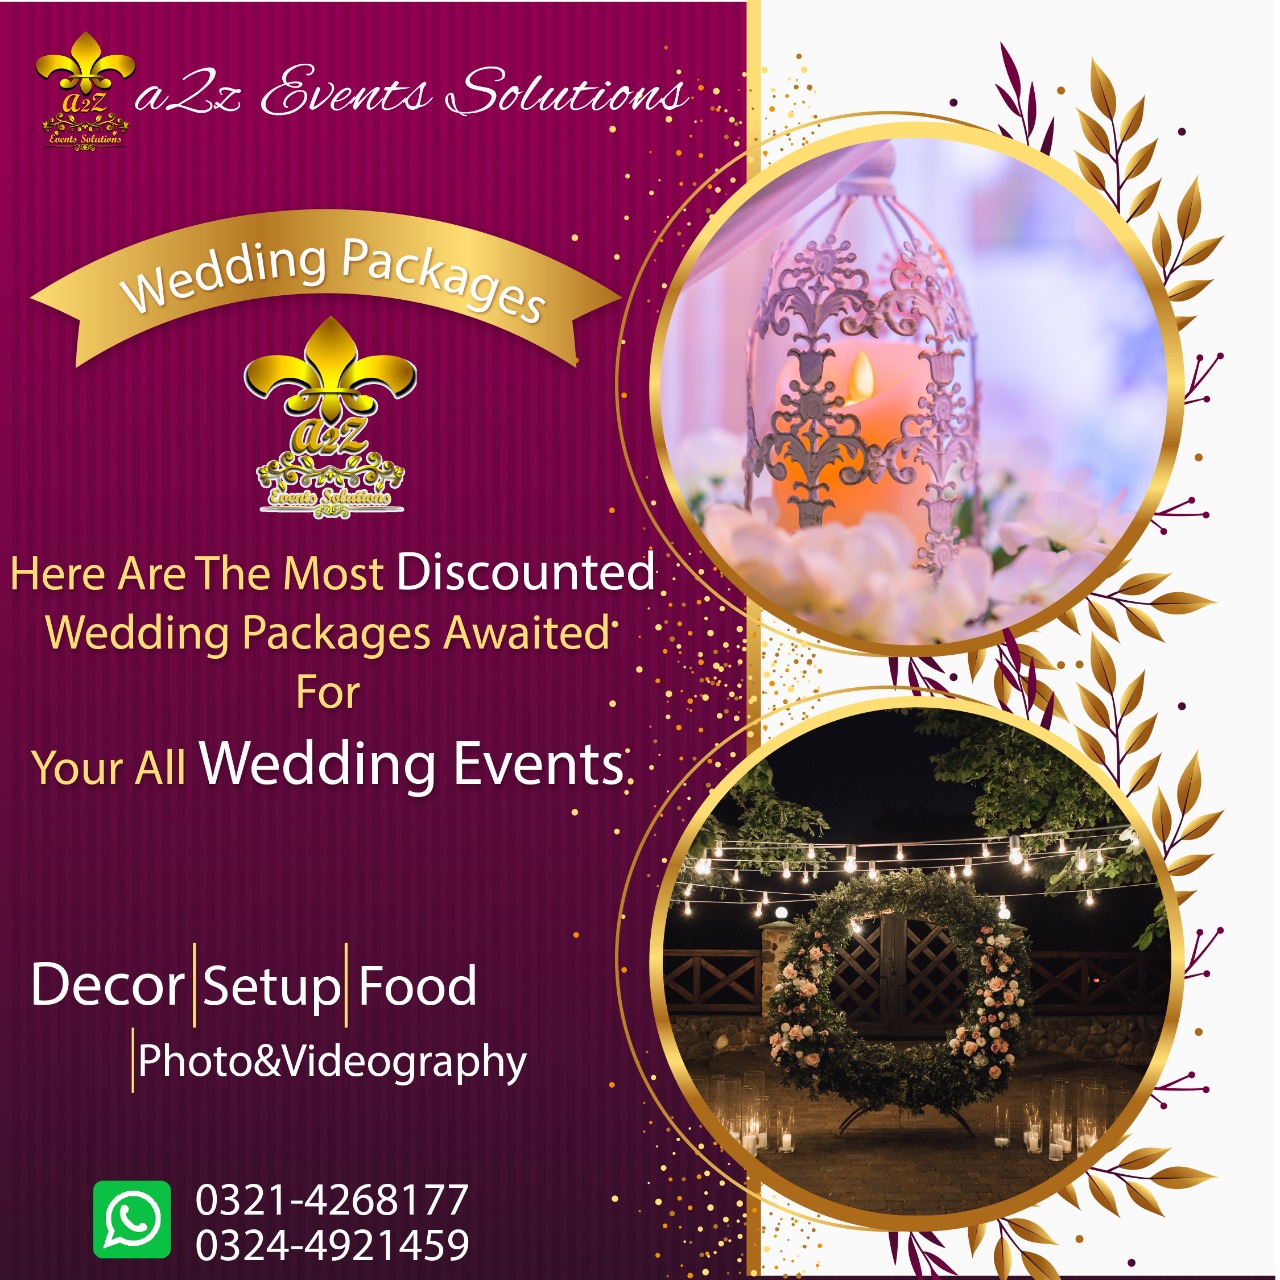 Wedding packages by a2z Events Solutions| wedding planner prices